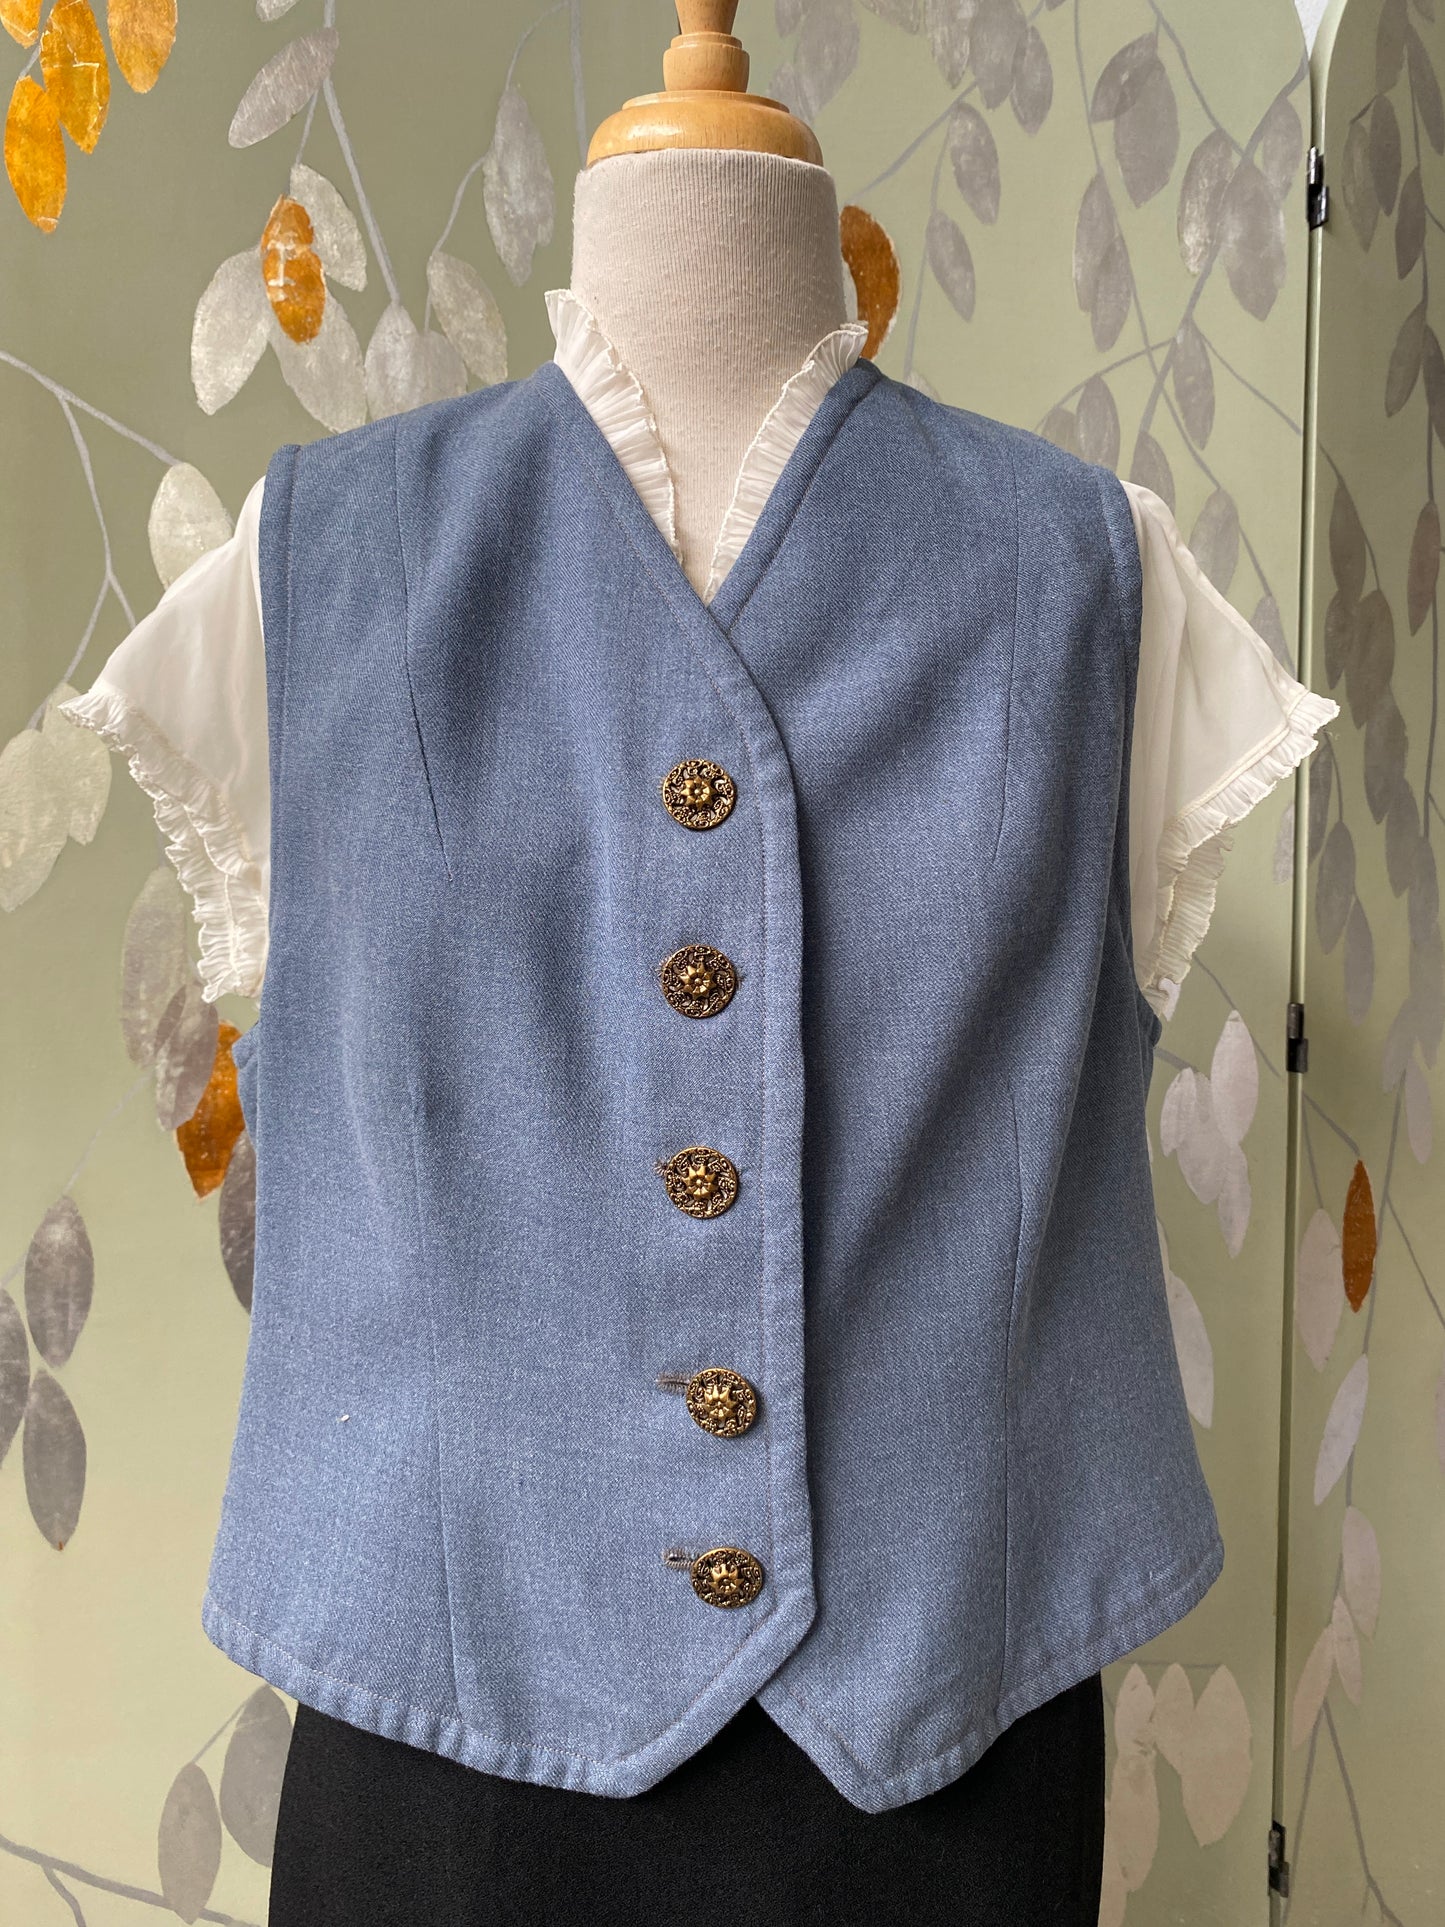 Vintage 1950s Blue Waistcoat with Metal Buttons, Large 